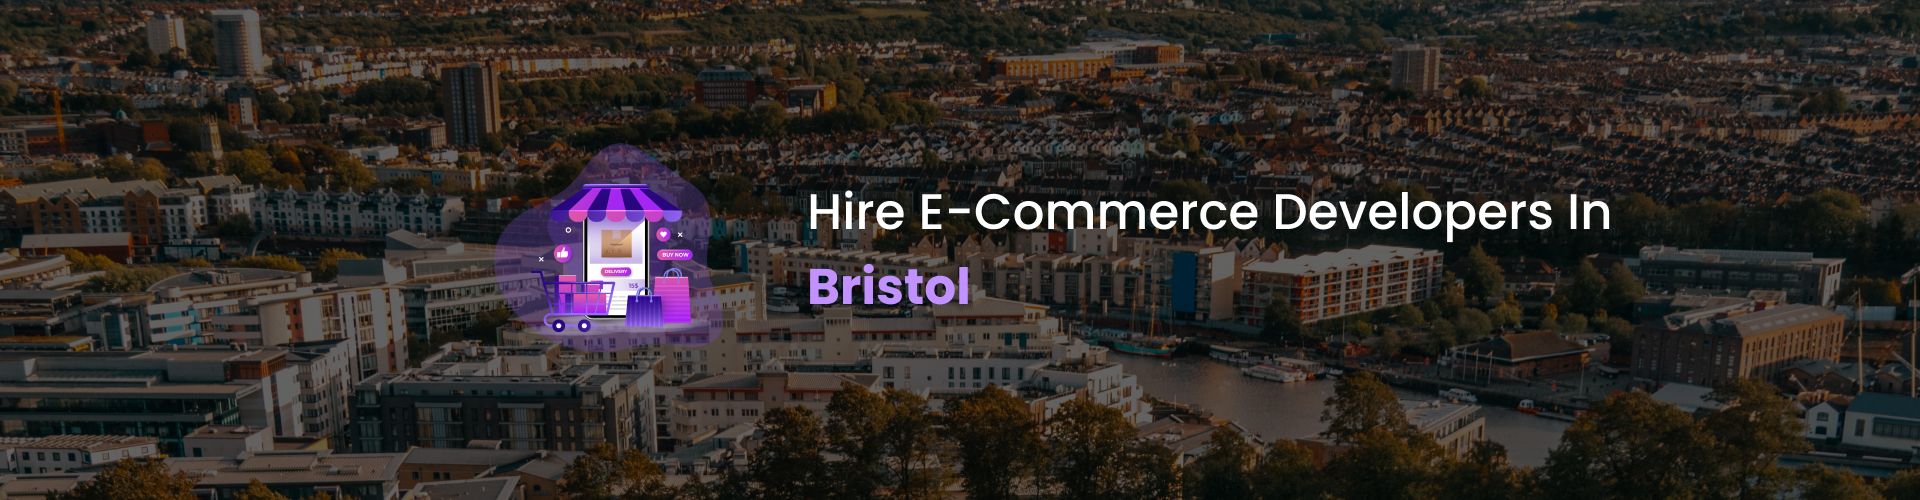 hire ecommerce developers in bristol